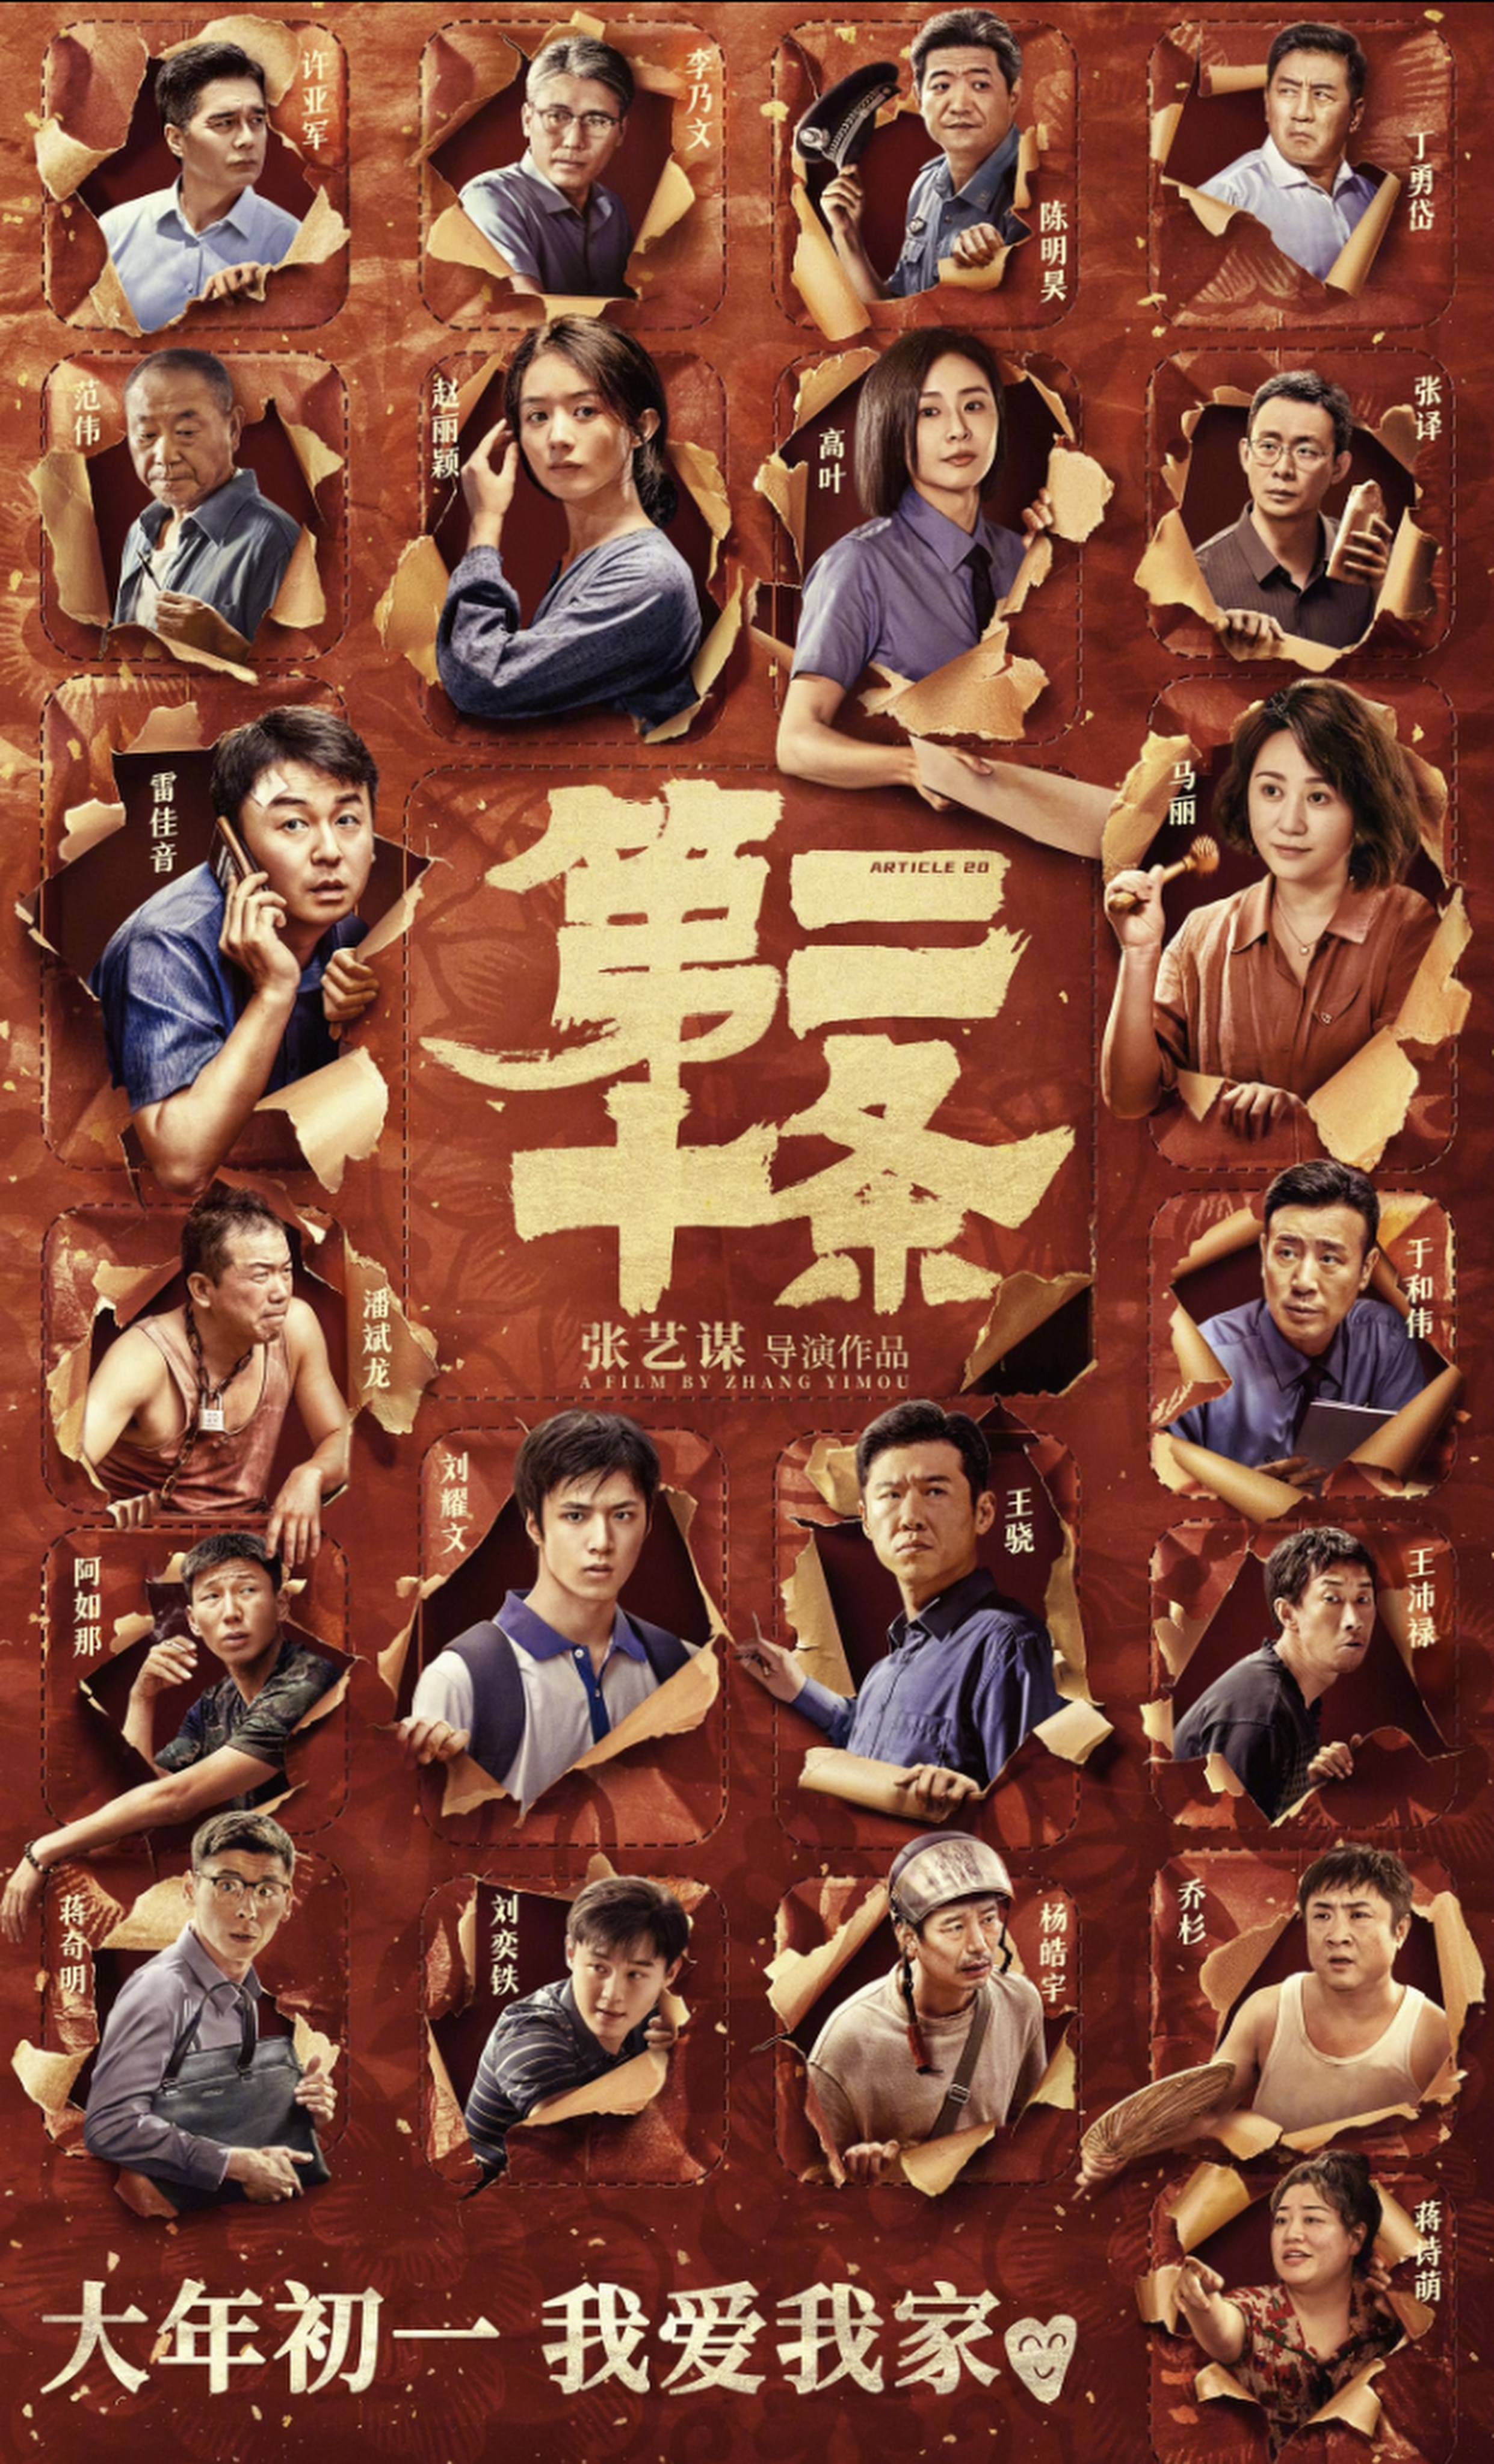 Zhang Yimou’s new hit movie, which explores the controversial issue of the right to self-defence in China, stands in sharp contrast to the country’s legal realities, according to experts. Photo: IMBD